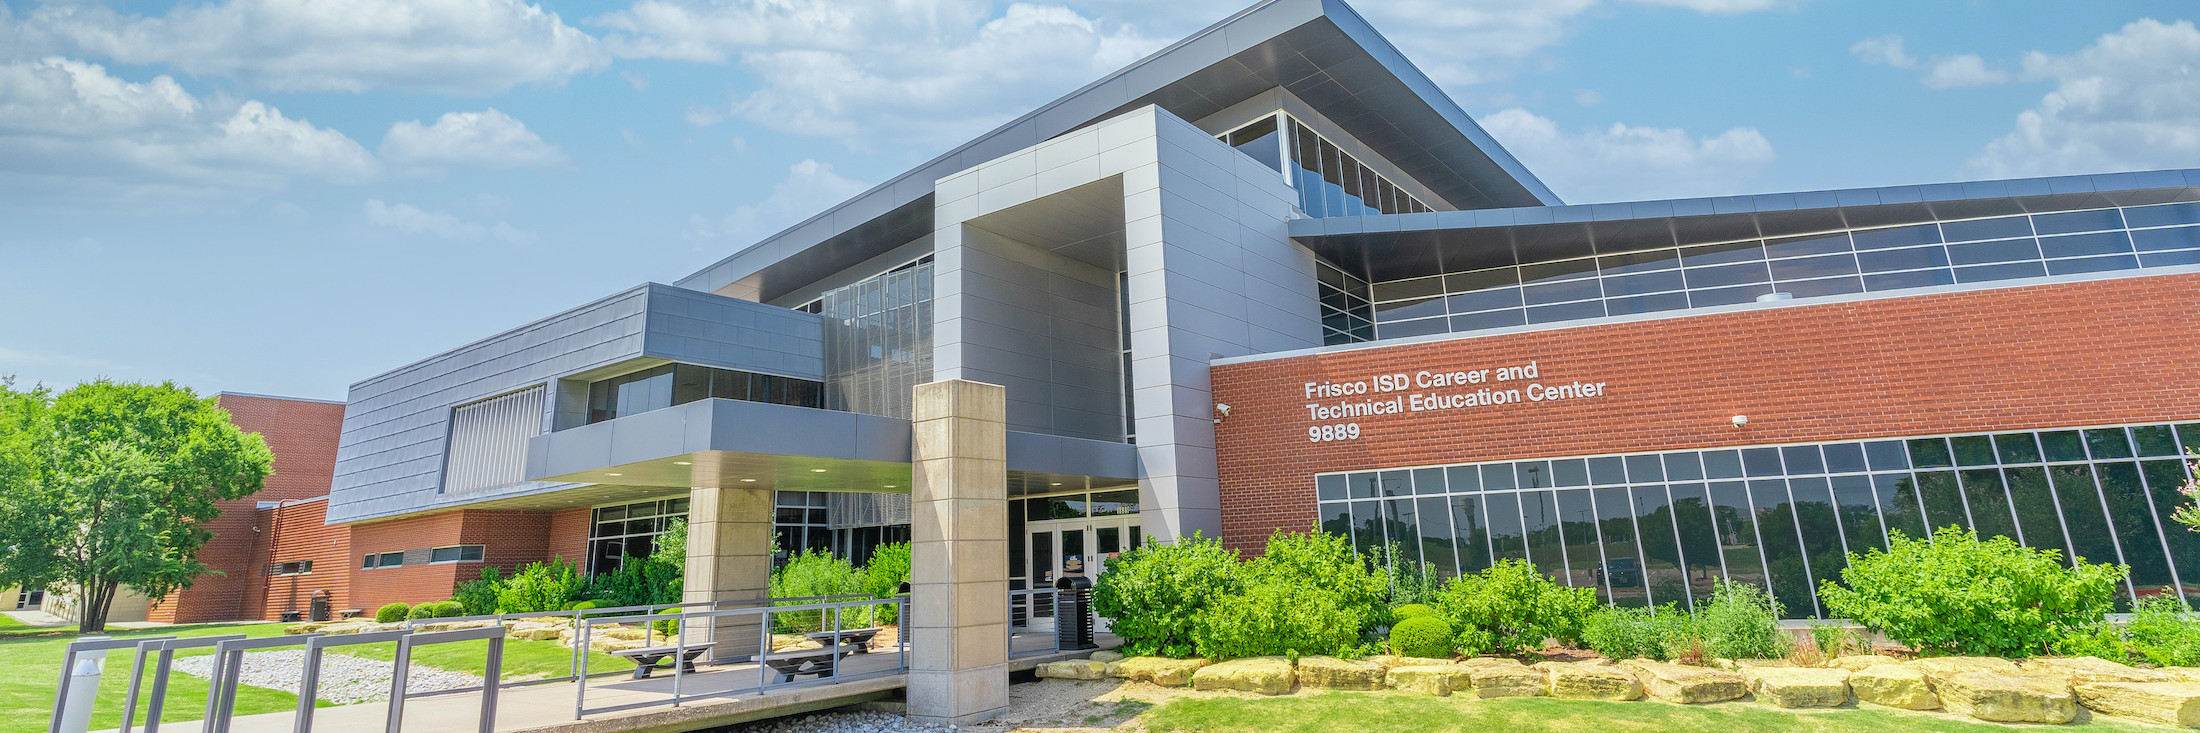 Front entrance of the Frisco ISD Career and Technology Education Center